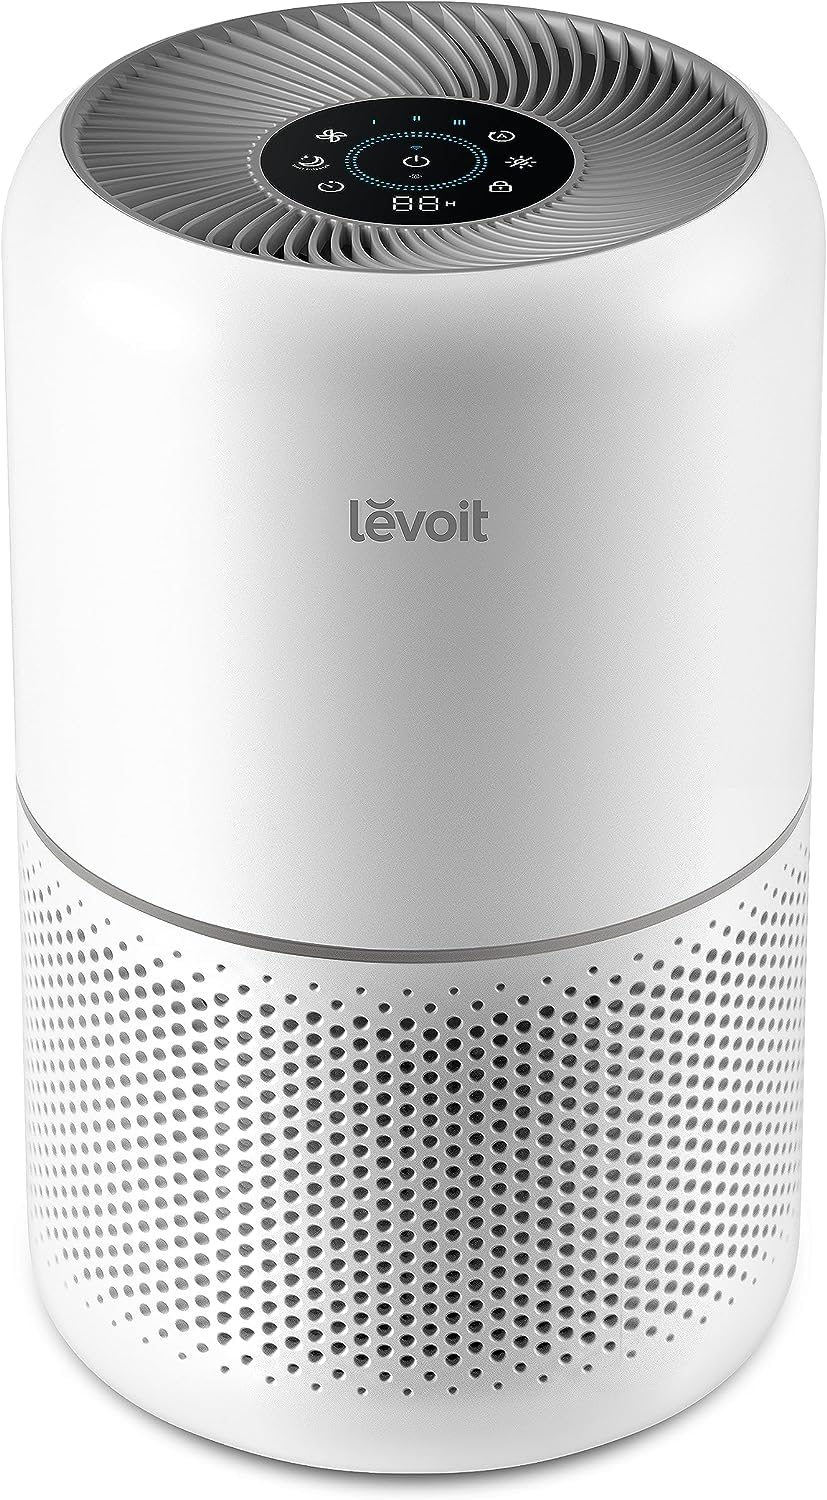 LEVOIT Smart Air Purifier for Home Bedroom, H13 HEPA Air Filter with Real Time Air Quality Sensor, Removes Pollen Allergies Dust Odours, Alexa Enabled Air Cleaner with Quiet Auto Mode, Core300S